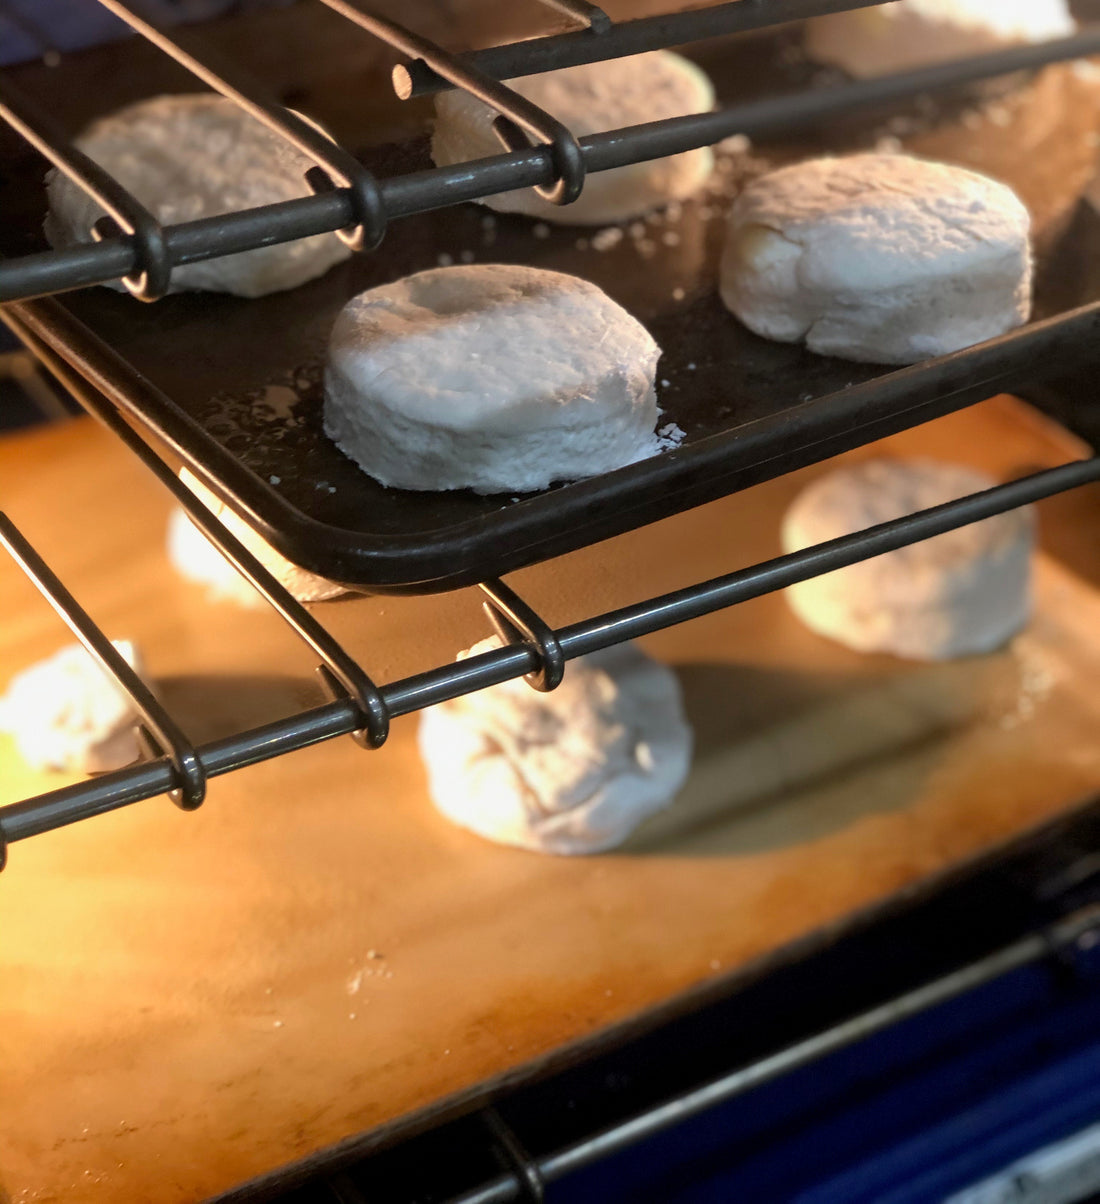 Biscuits out of the oven